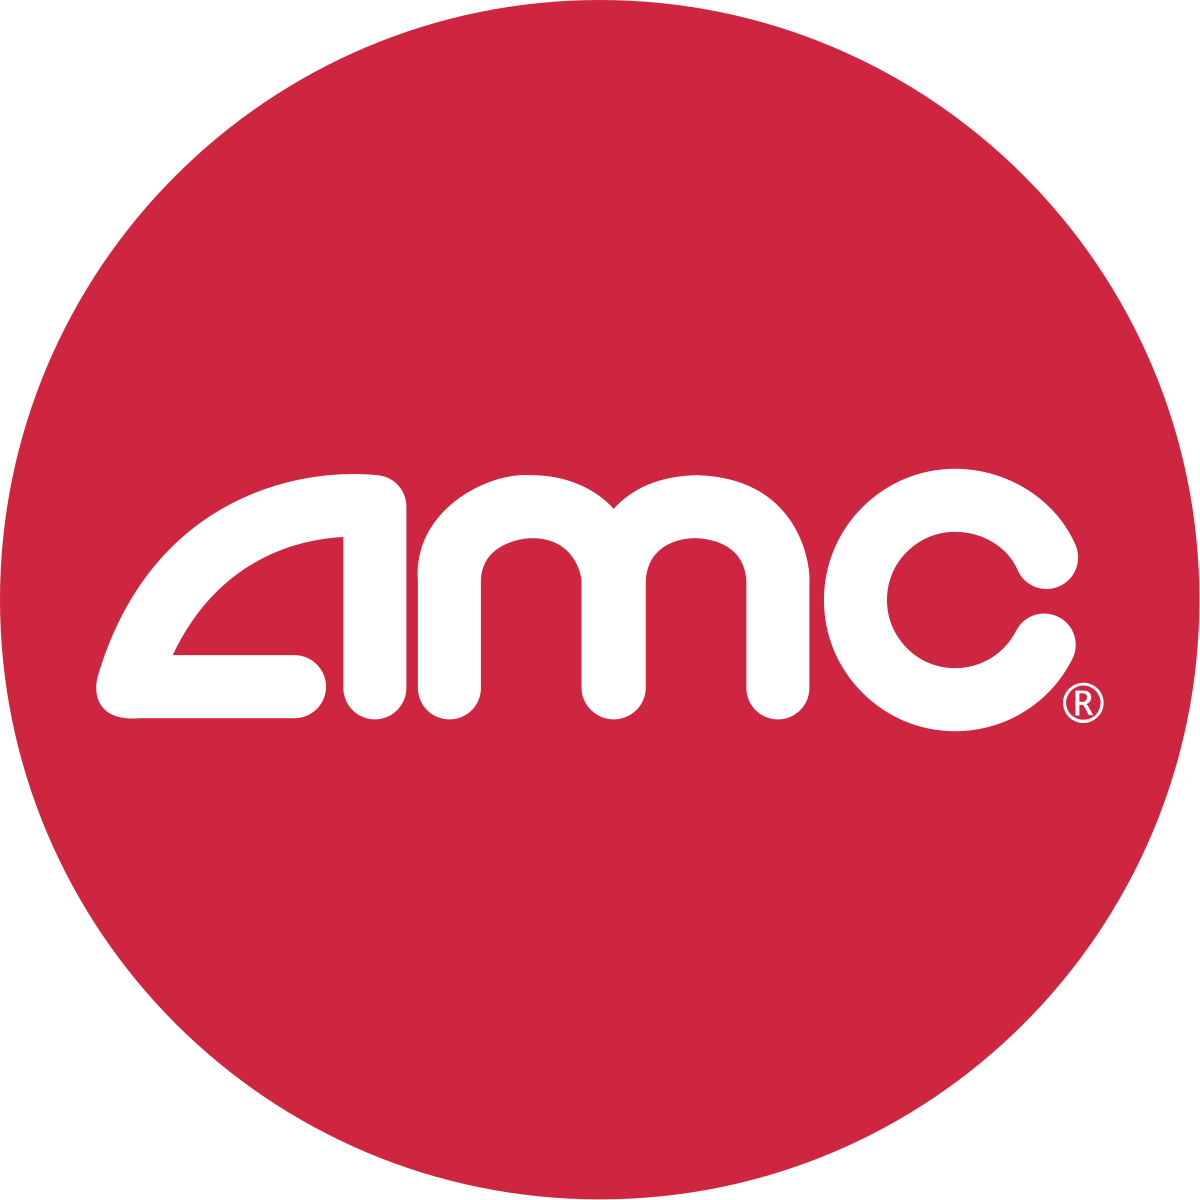 AMC Movies | If you go to a movie on your birthday, you can receive free large popcorn.